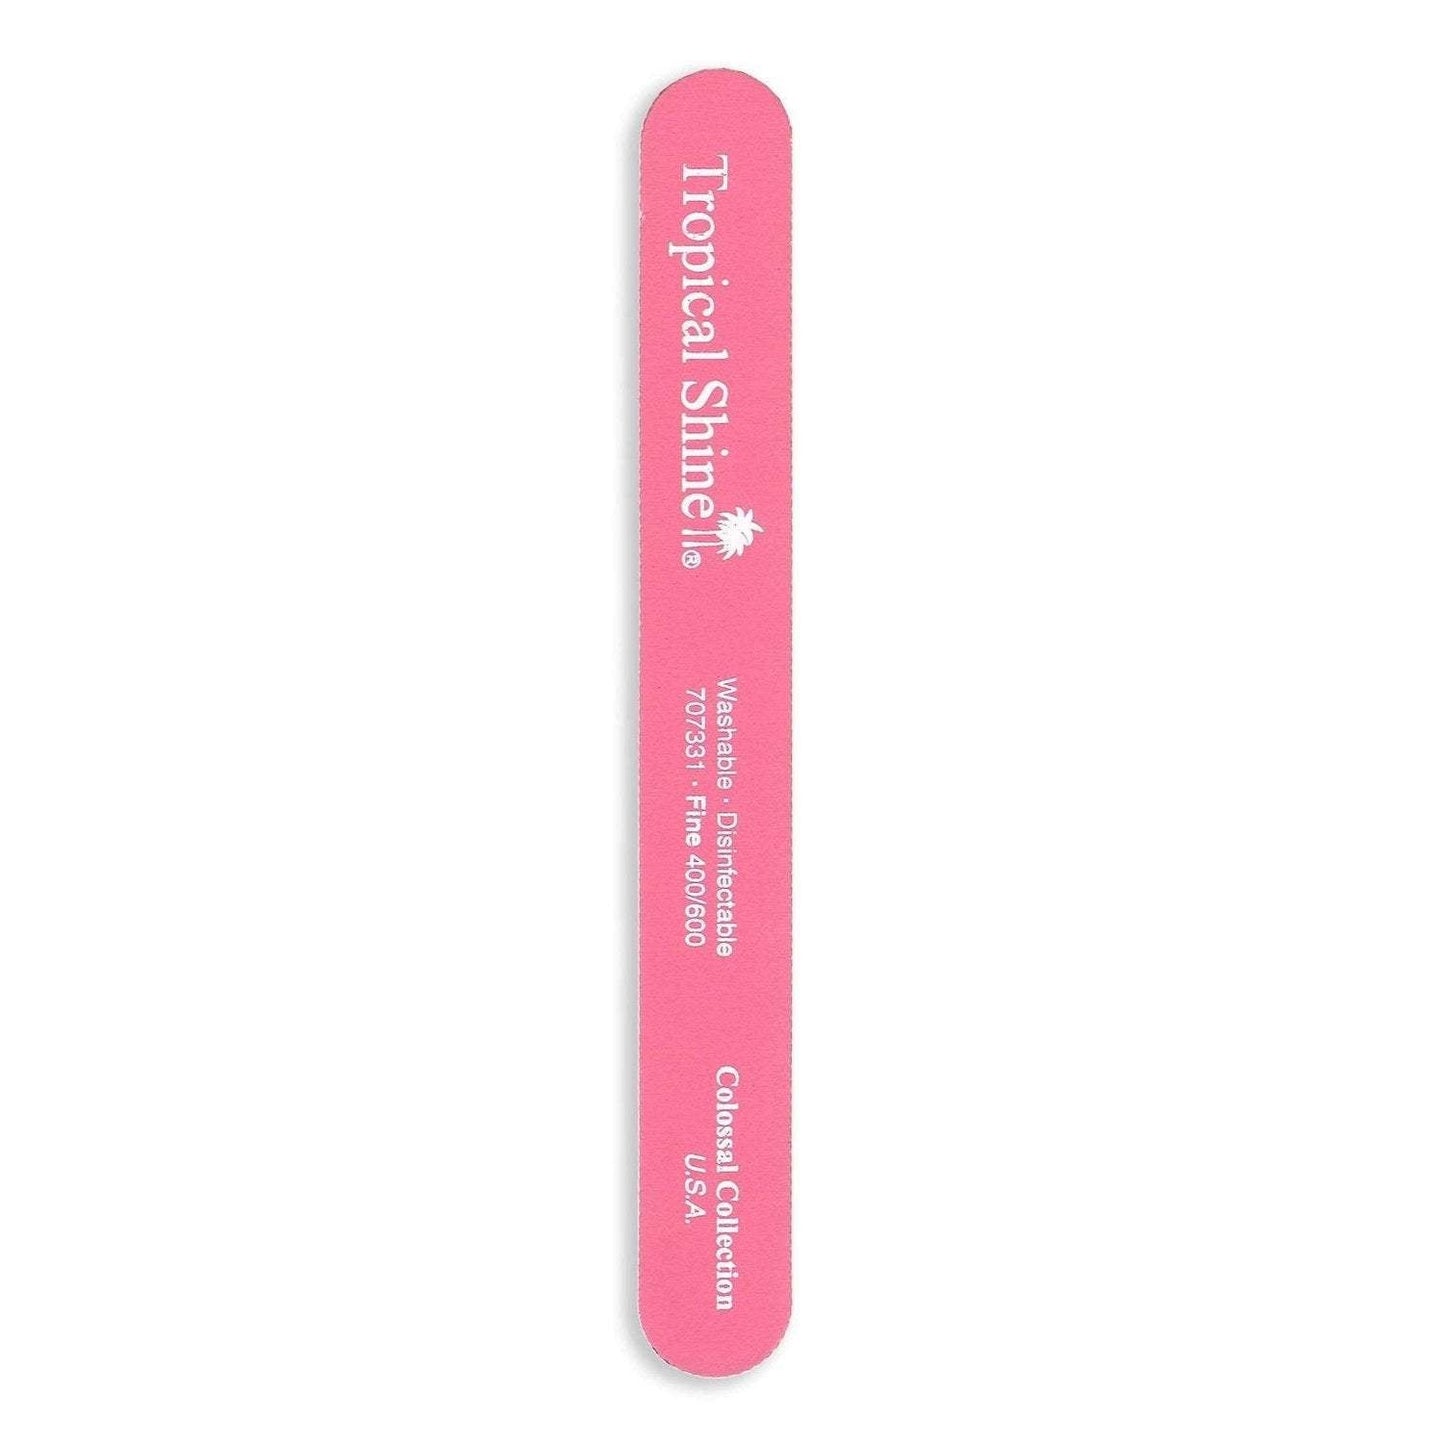 Tropical Shine Nail File Pink File 400/ 600 (Fine/ Extra Fine) 8 1/2 in x 1 in (707331)